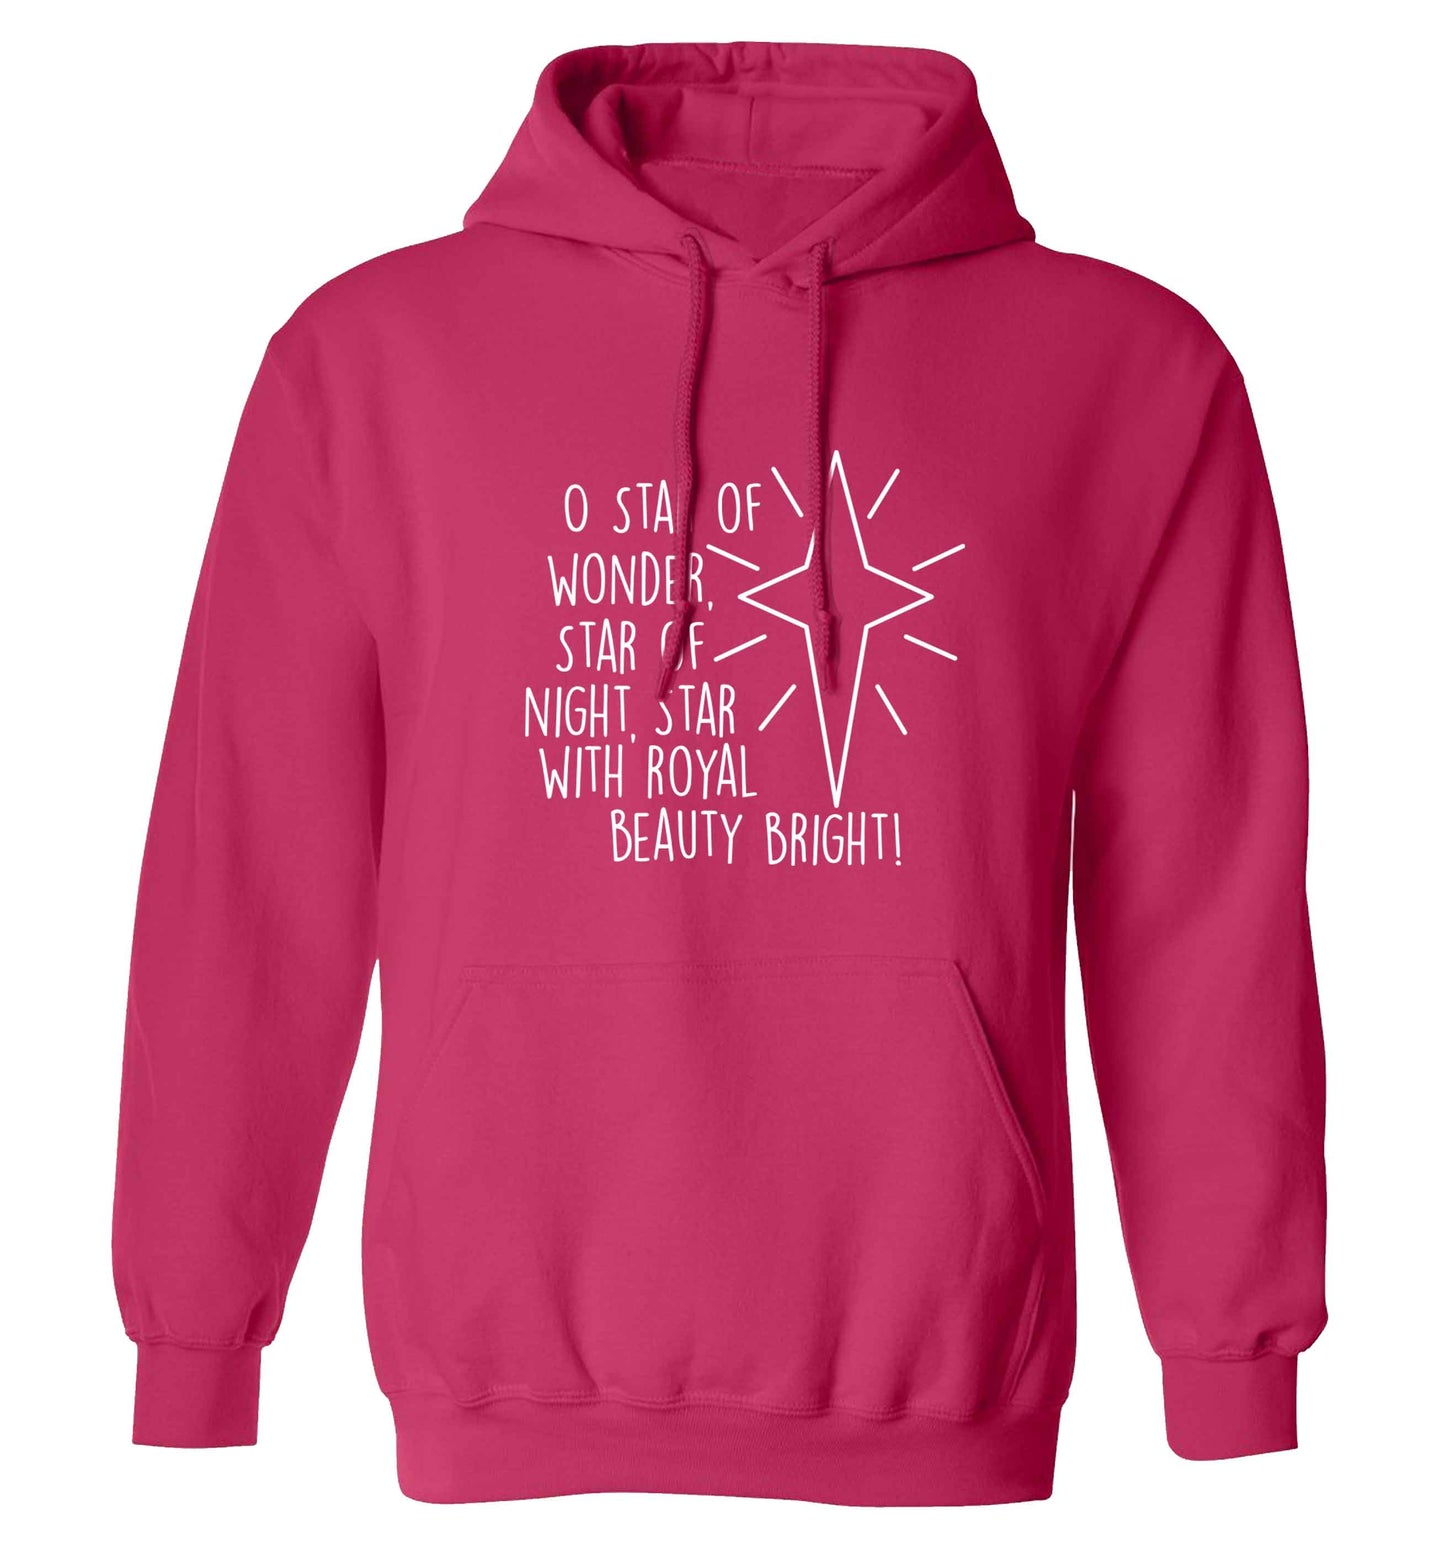 Oh star of wonder star of night, star with royal beauty bright adults unisex pink hoodie 2XL